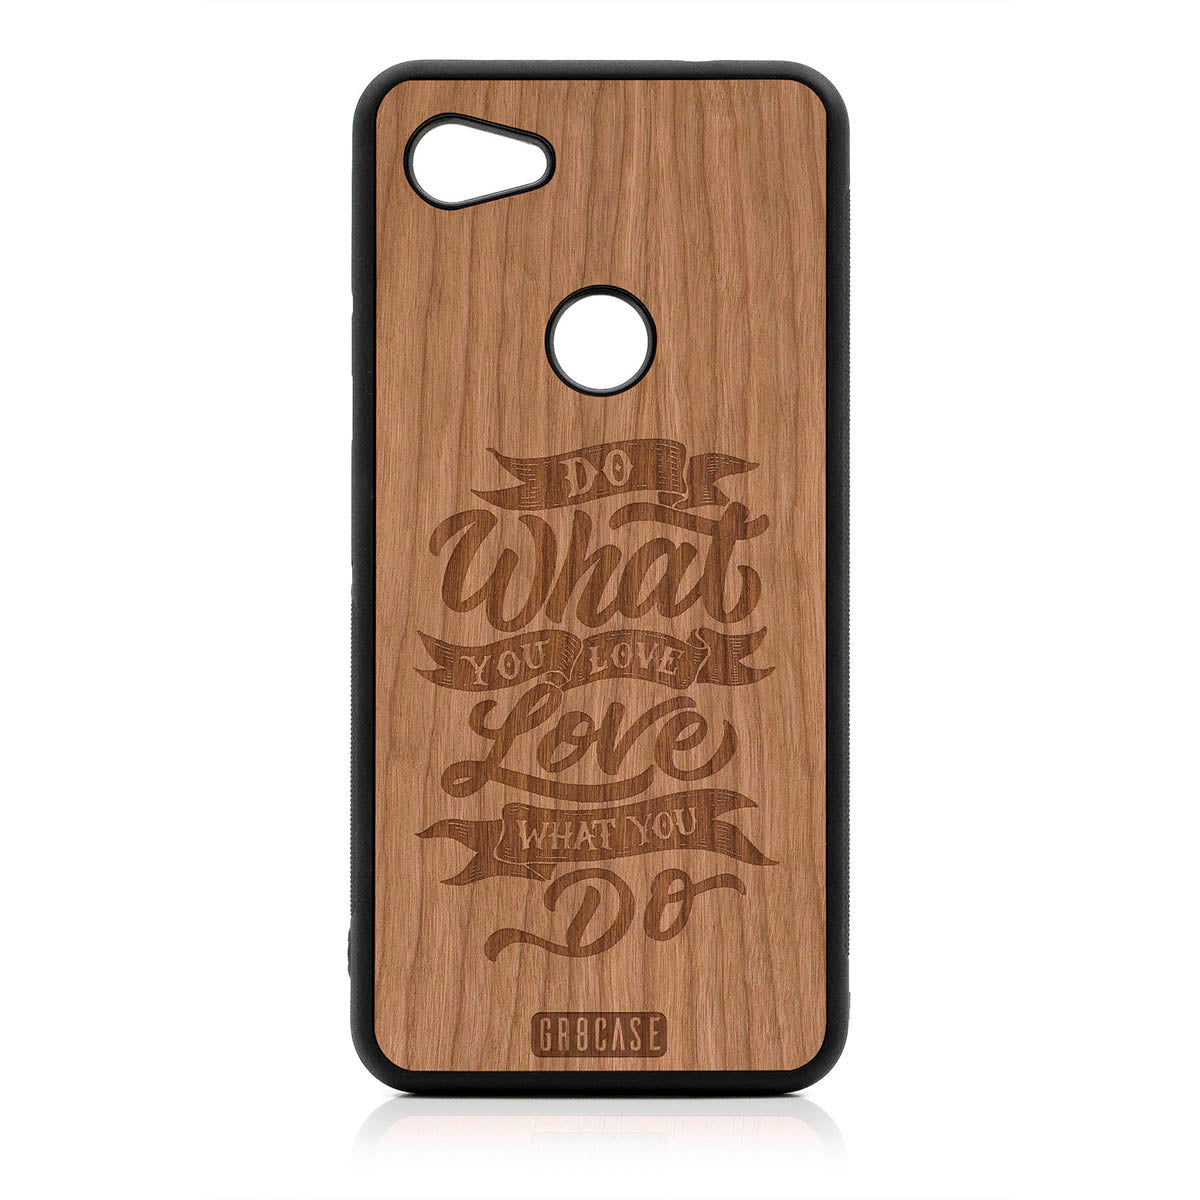 Do What You Love Love What You Do Design Wood Case For Google Pixel 3A by GR8CASE